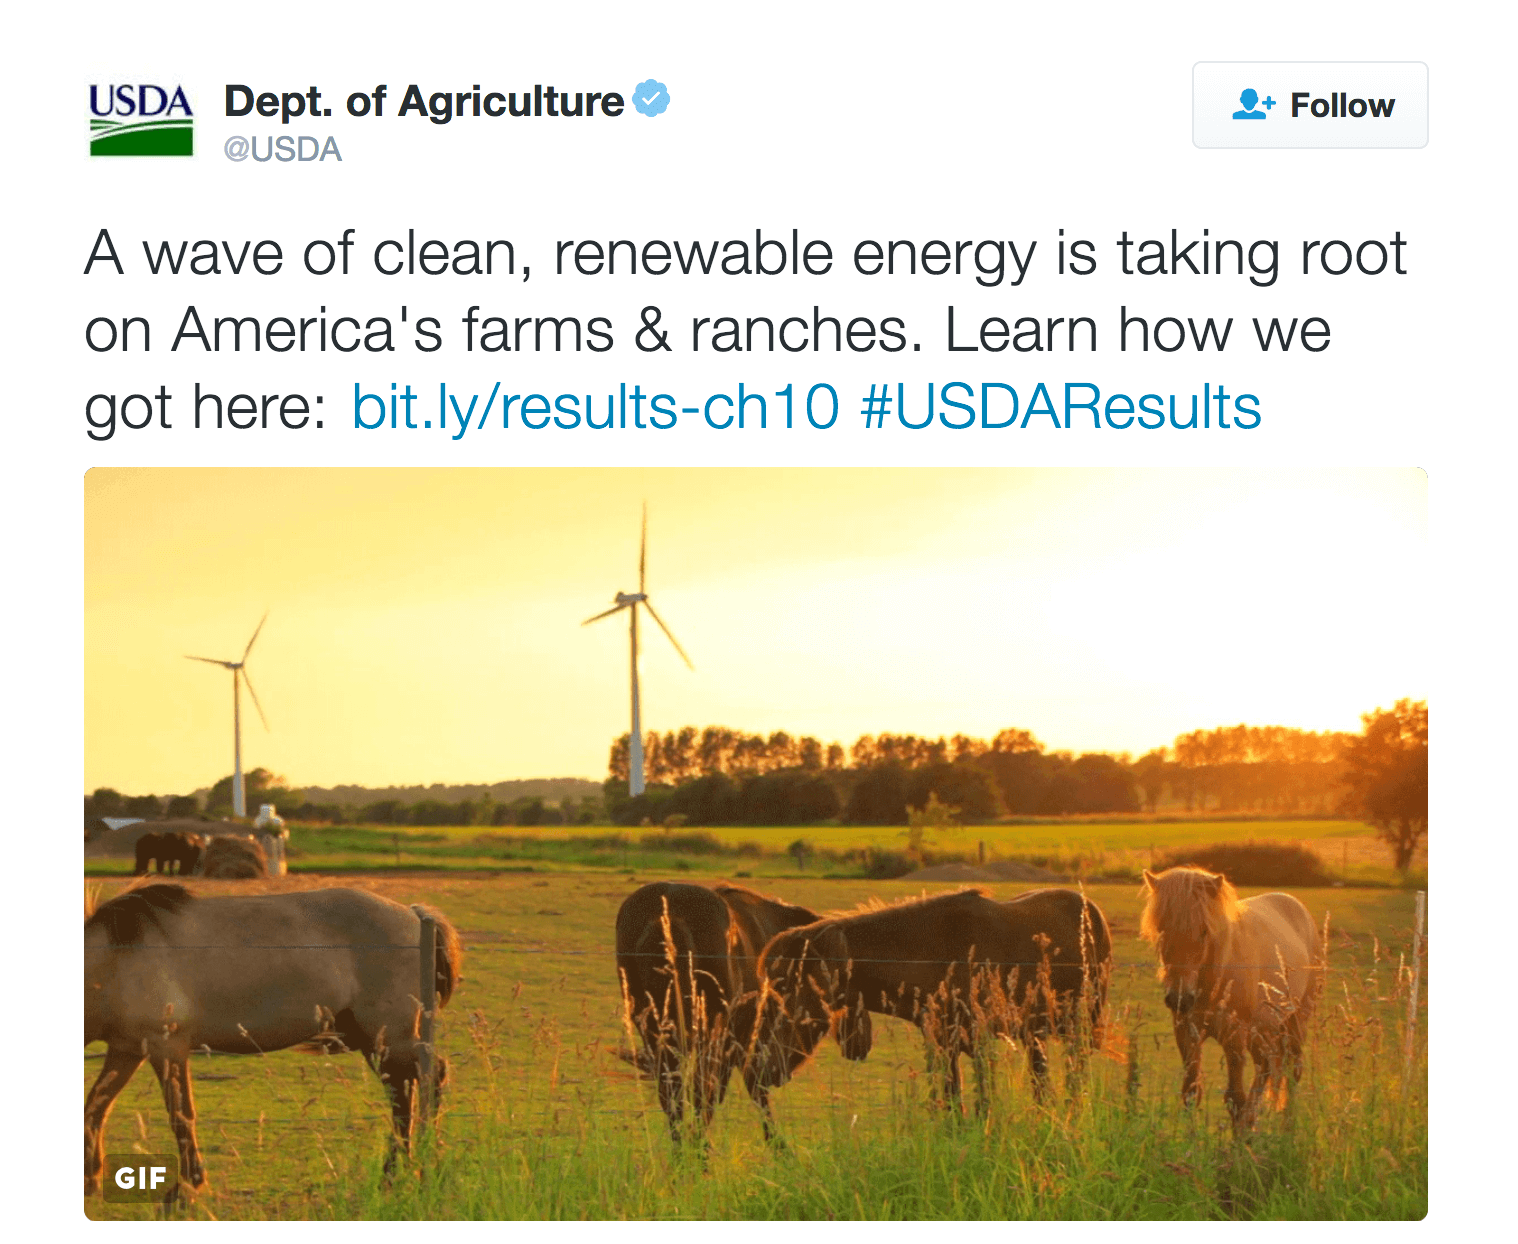 A wave of clean, renewable energy is taking root on America's farms & ranches. Learn how we got here: http://bit.ly/results-ch10  #USDAResults